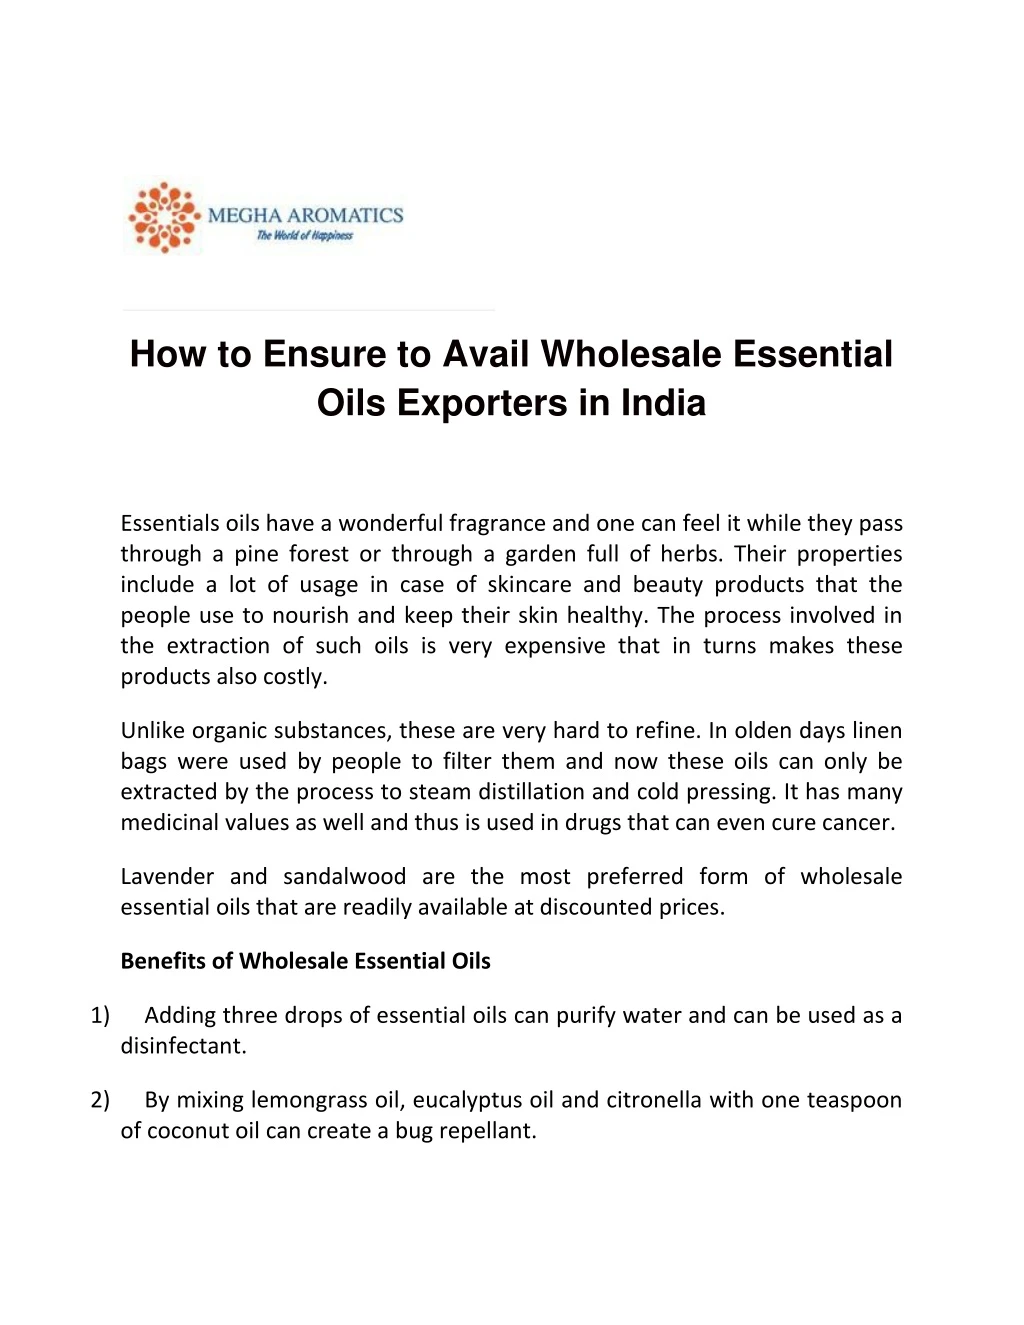 how to ensure to avail wholesale essential oils